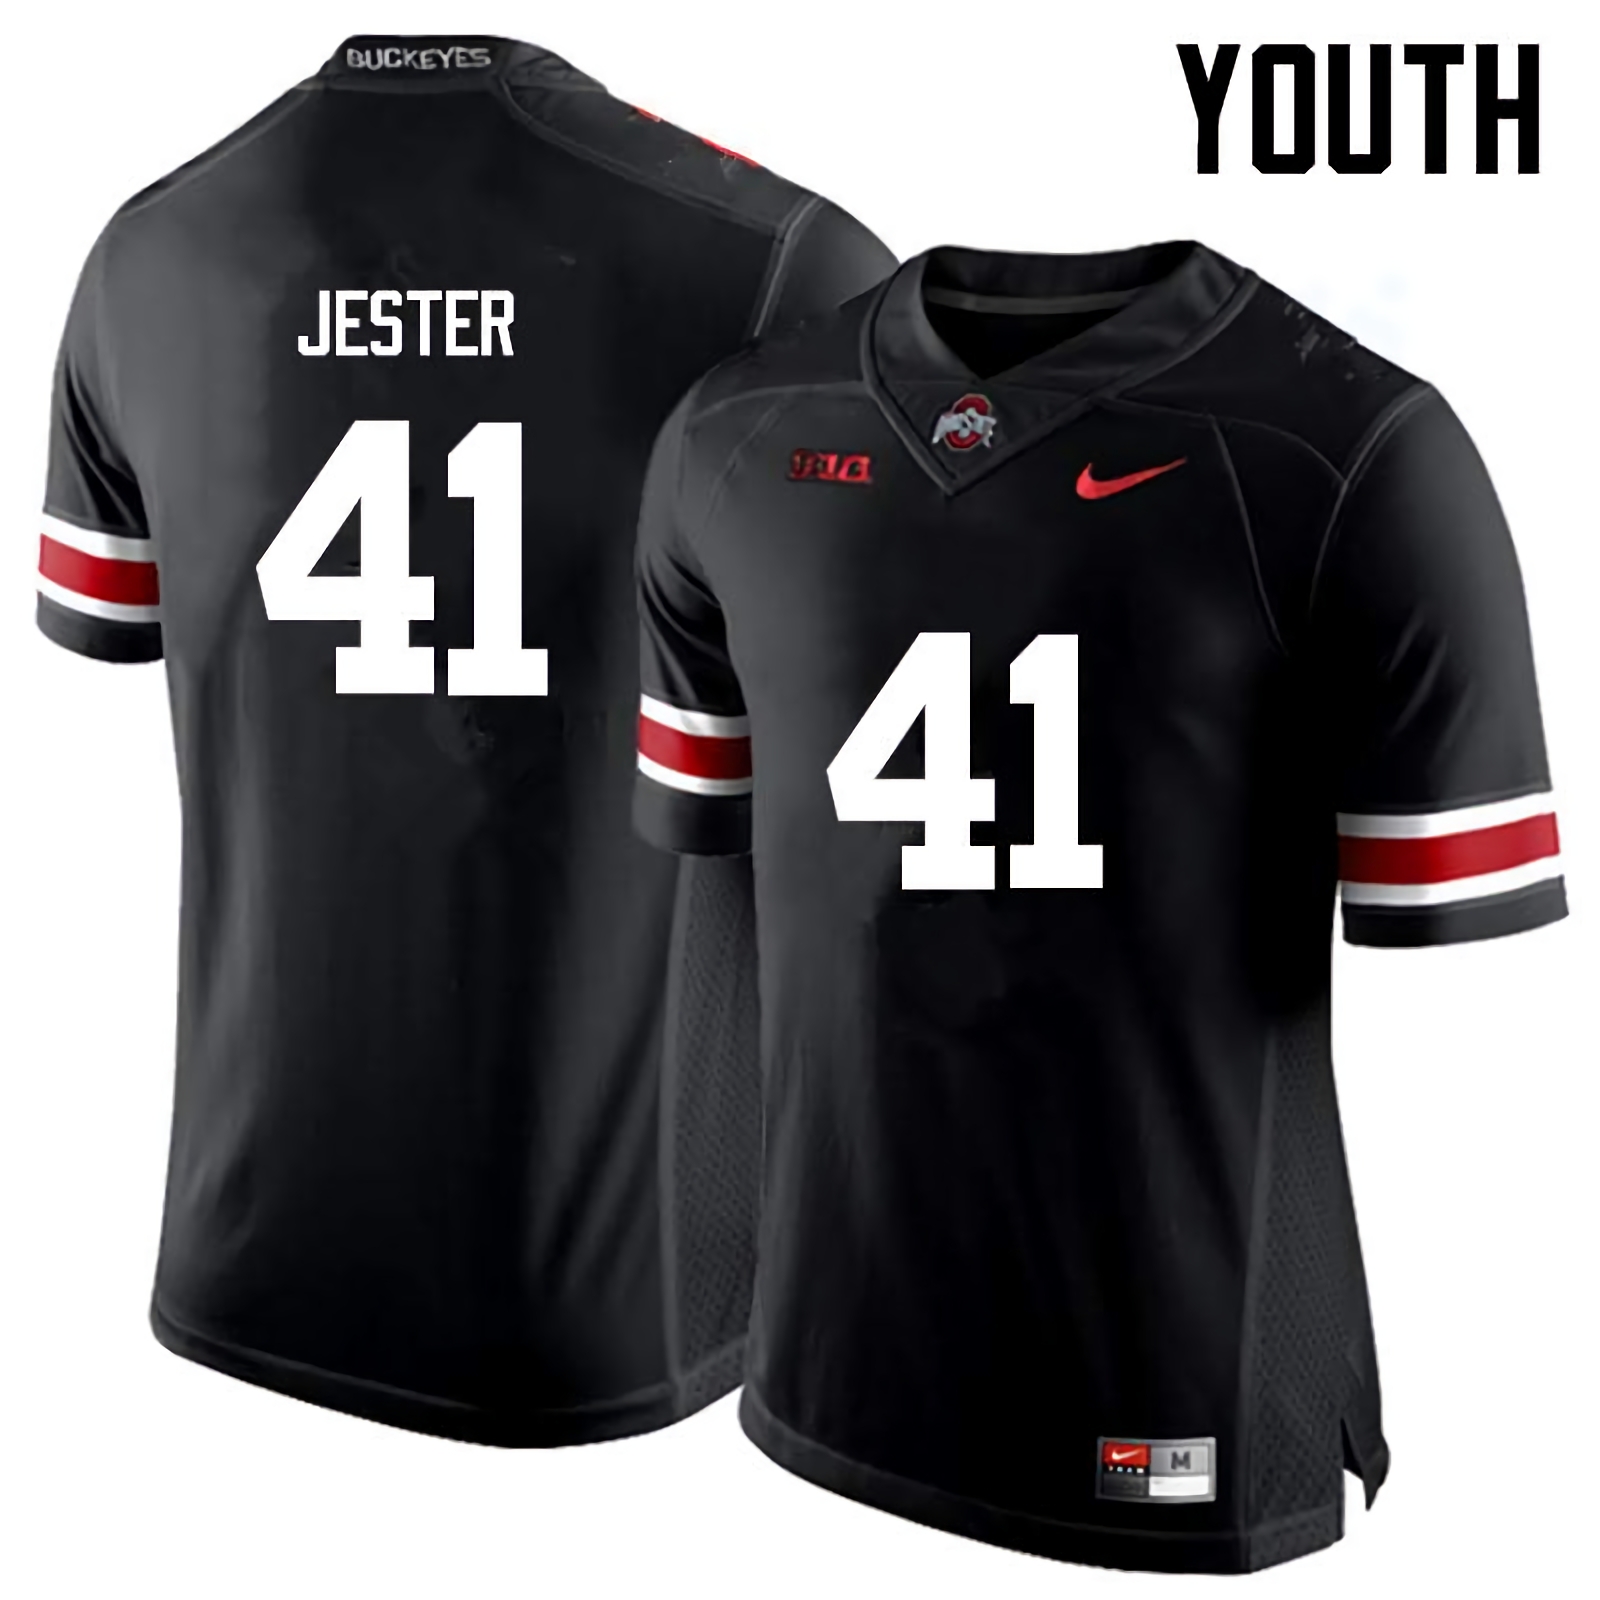 Hayden Jester Ohio State Buckeyes Youth NCAA #41 Nike Black College Stitched Football Jersey JHG2056GR